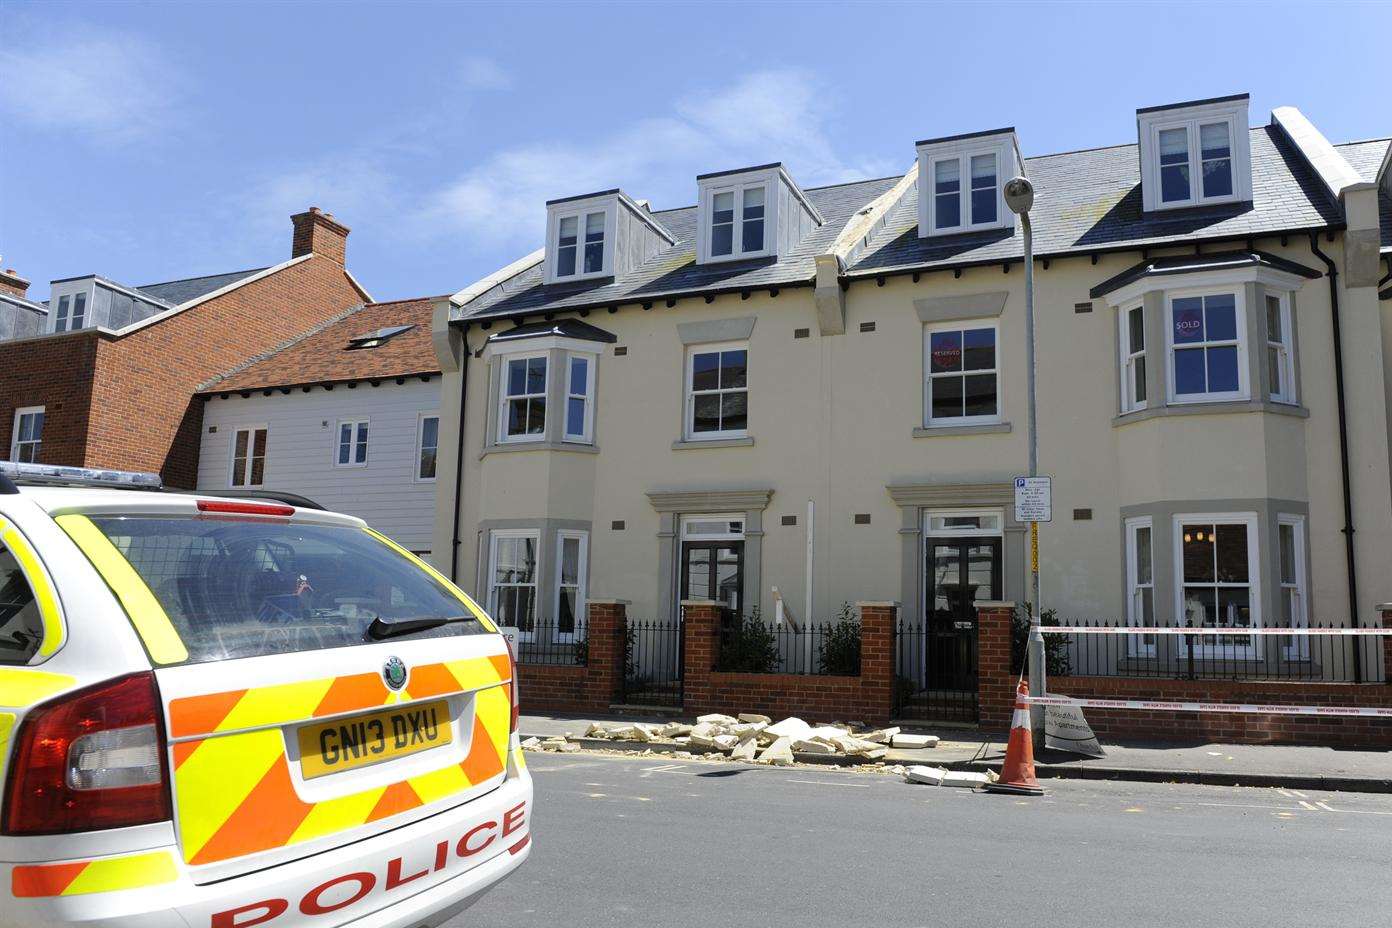 Police have been at the scene after part of a building collapsed